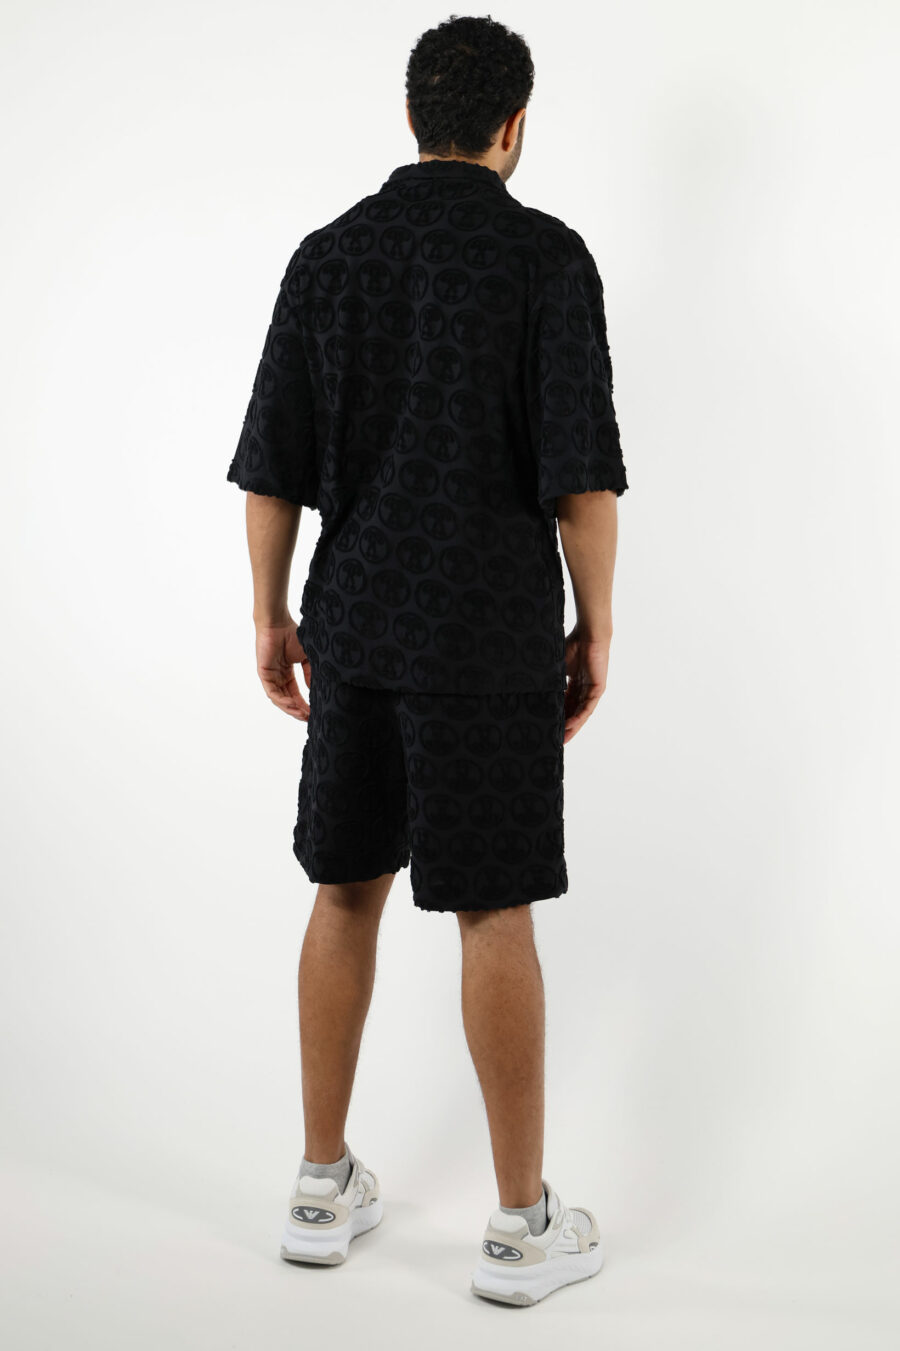 Black short sleeve shirt with "all over logo" double question - 111100